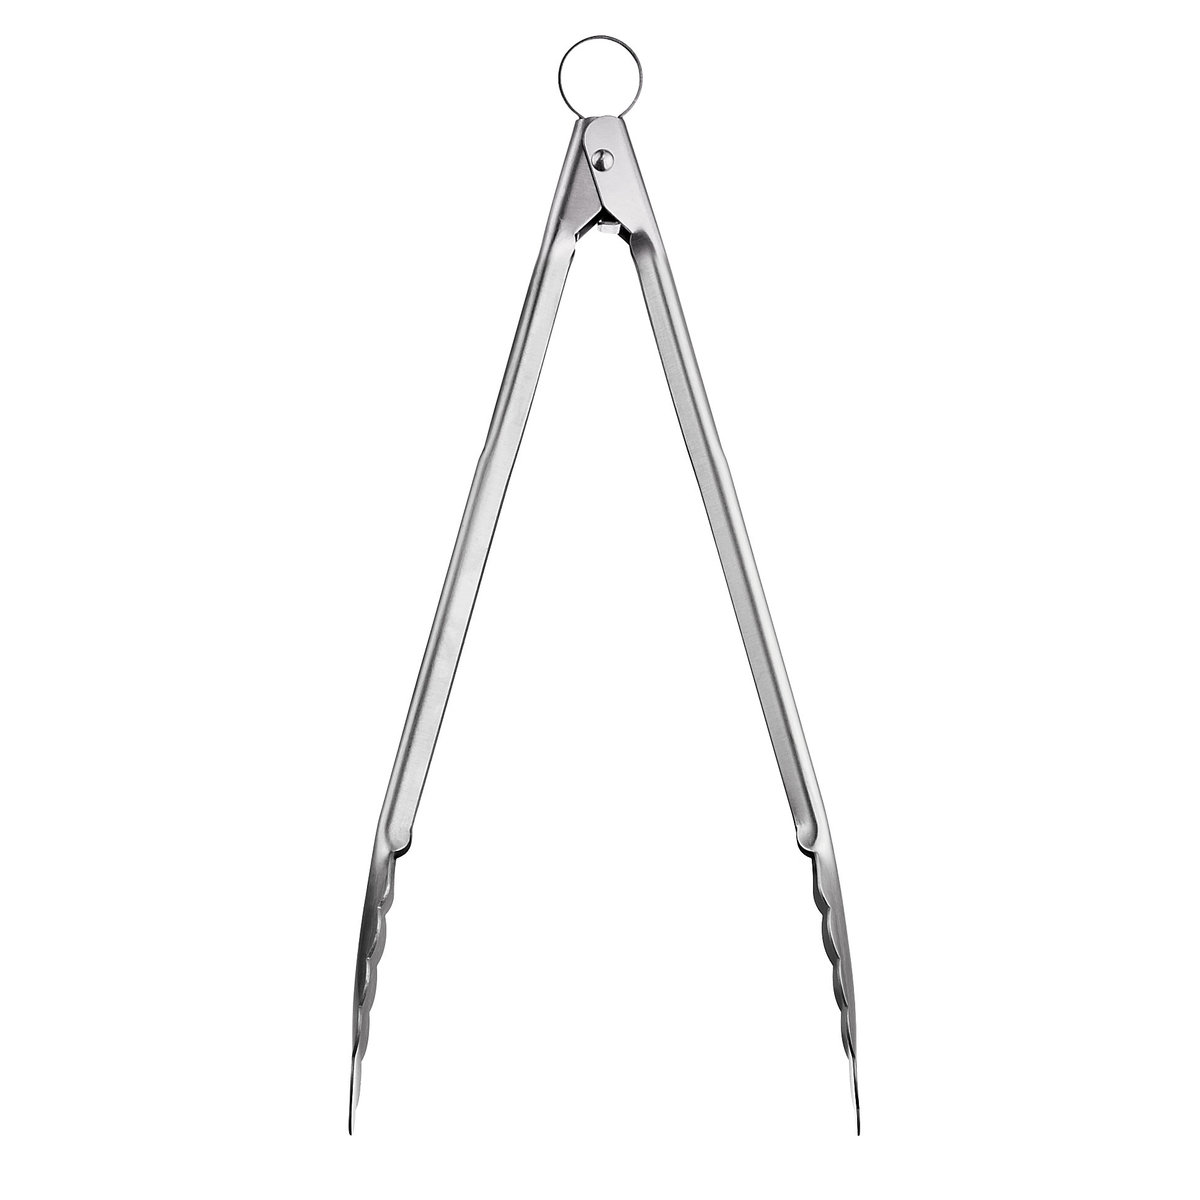 Stainless Steel Kitchen Locking Tongs 16" for Cooking, Serving, Grill, BBQ - Extra Large